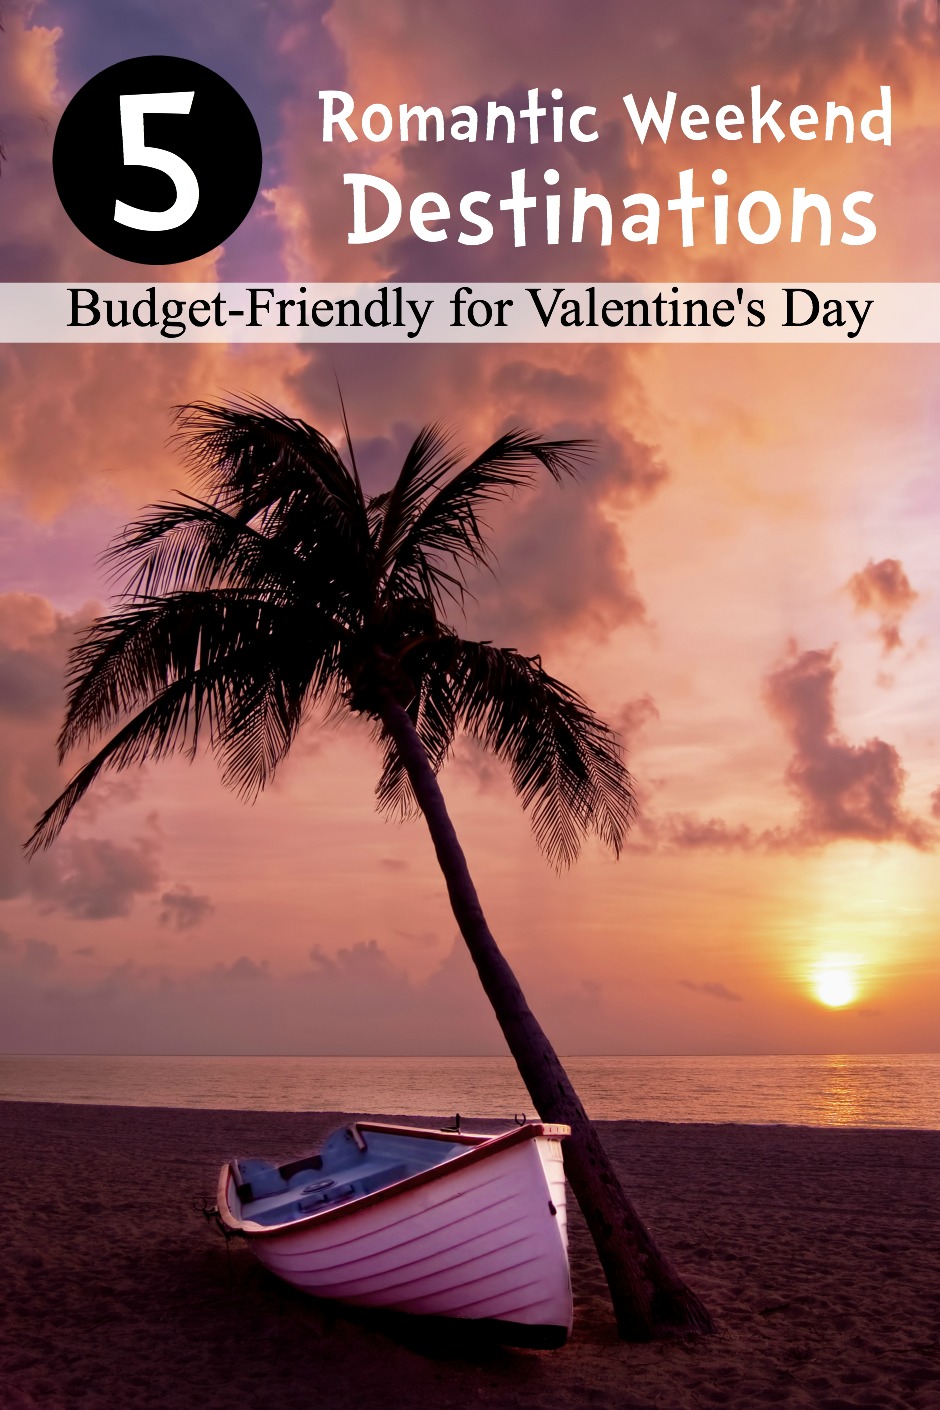 5-romantic-weekend-destinations-for-valentines-day-on-a-budget